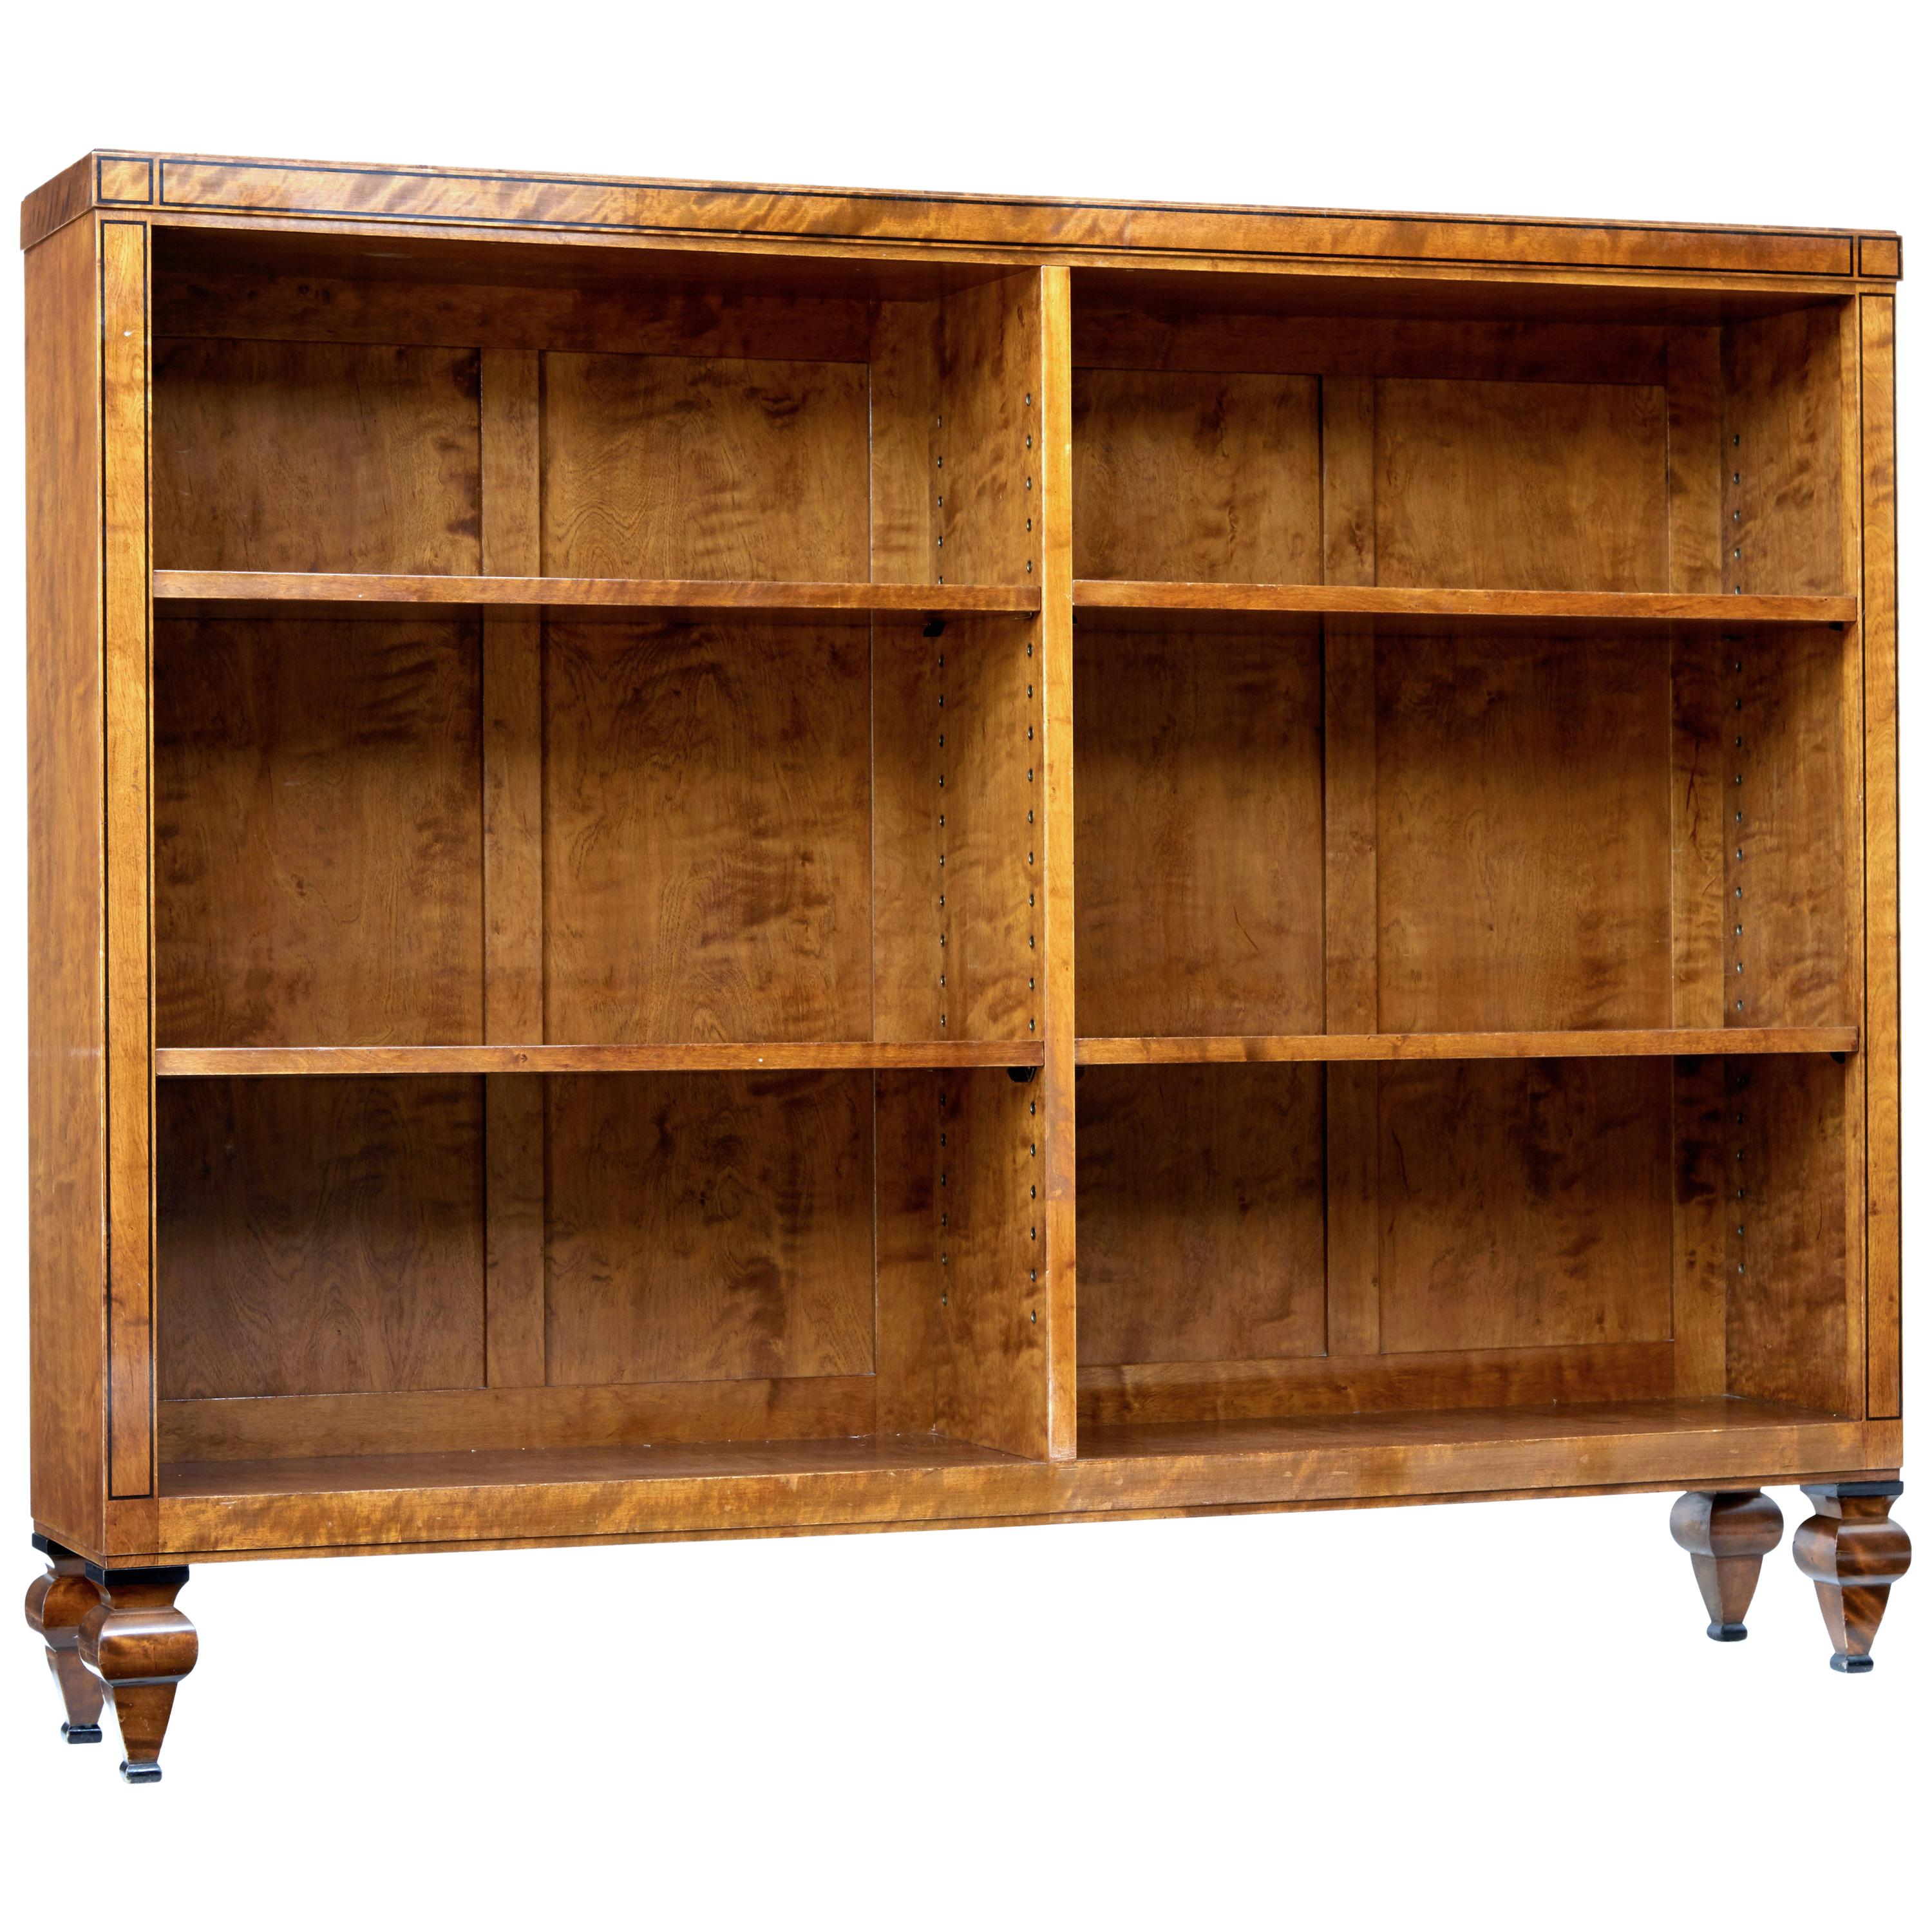 Early 20th century open birch bookcase by David Blomberg